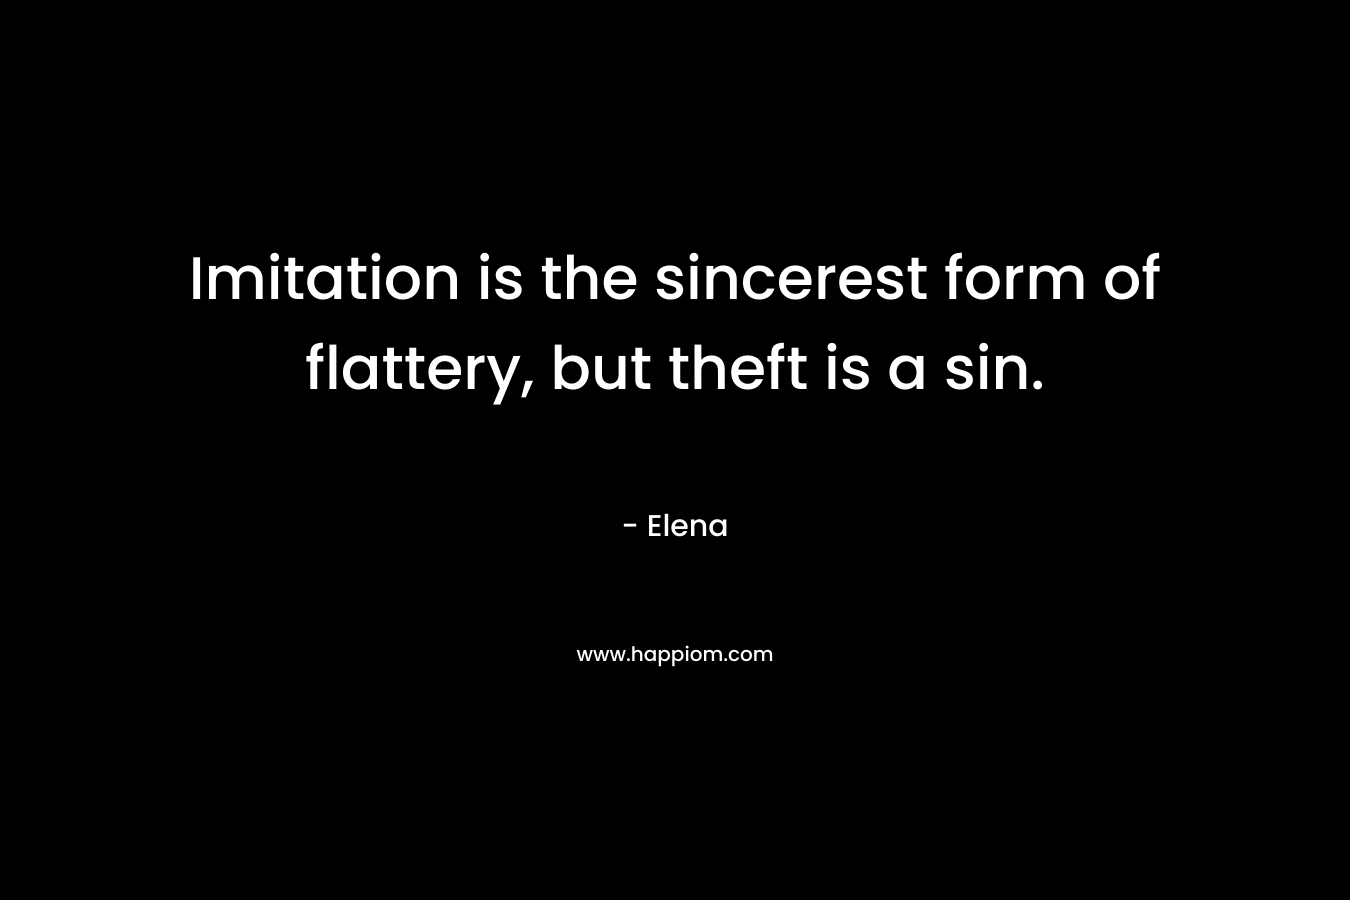 Imitation is the sincerest form of flattery, but theft is a sin. – Elena